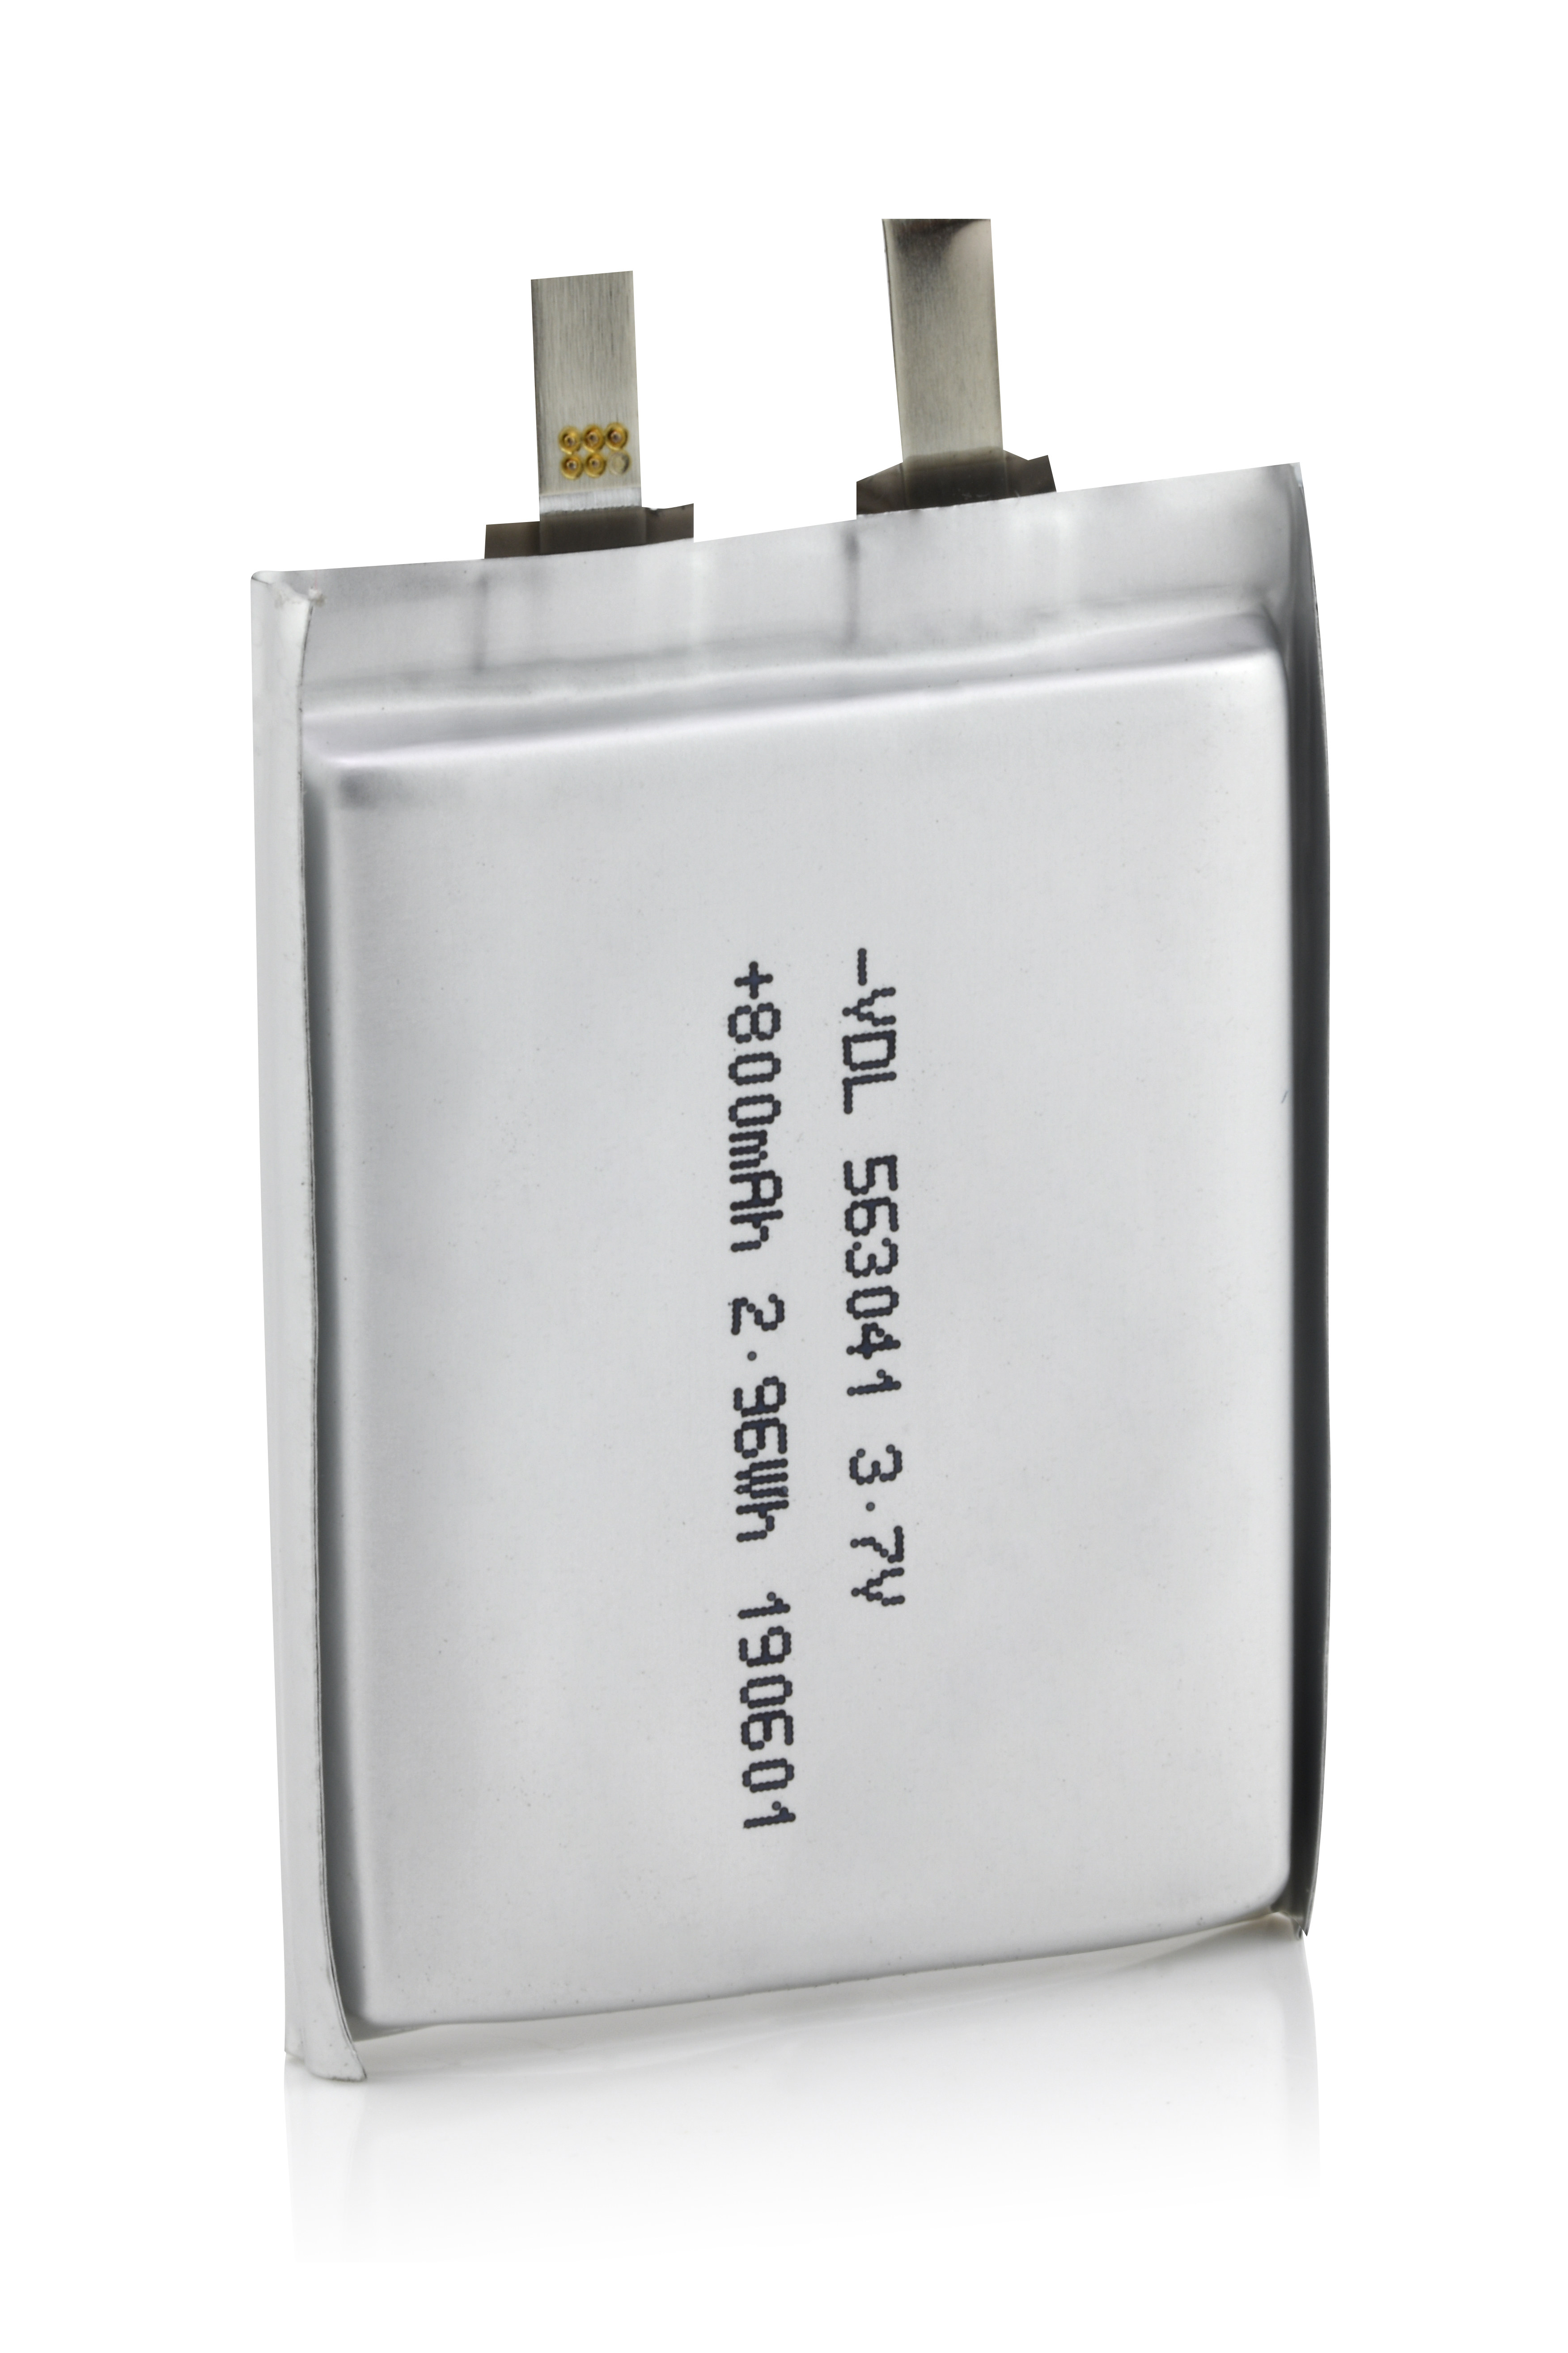 What are the components and features of Rechargeable Square Pouch Battery?